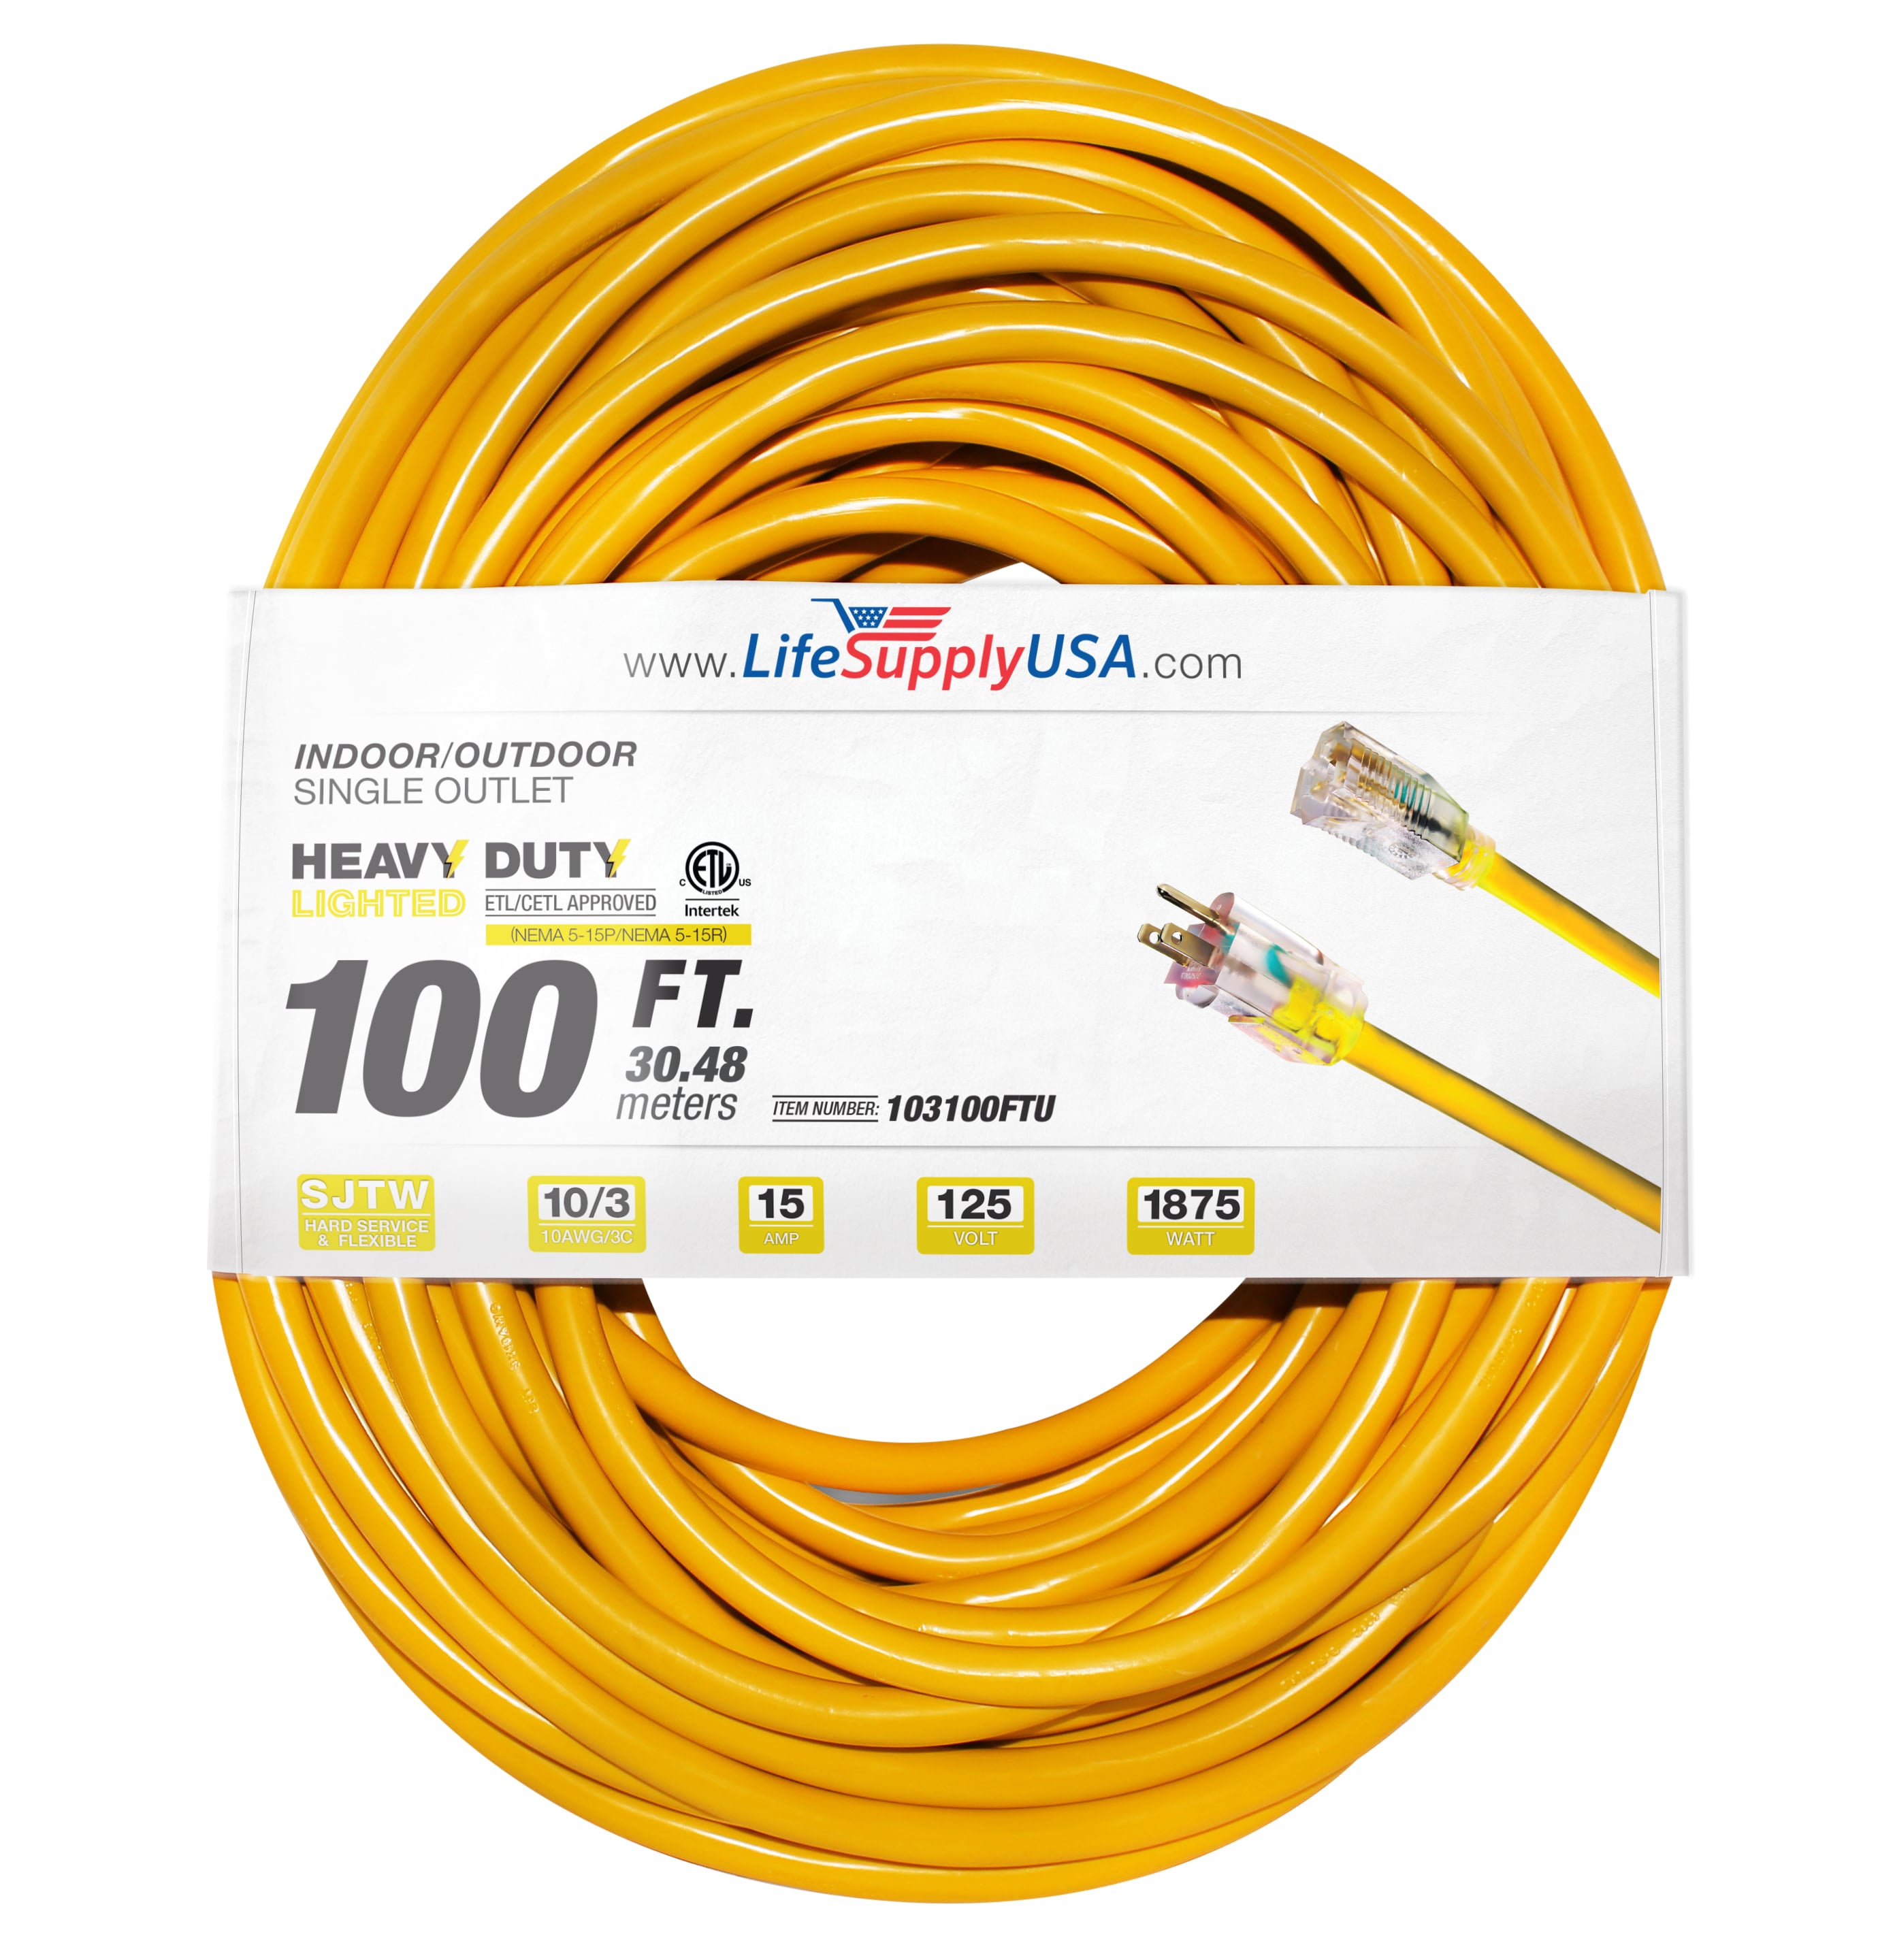 200 Foot Lighted Outdoor Extension Cord 12 SJTW Heavy Duty Yellow Extension Cable with Prong Grounded Plug for Safety Great for Garden and Maj - 1